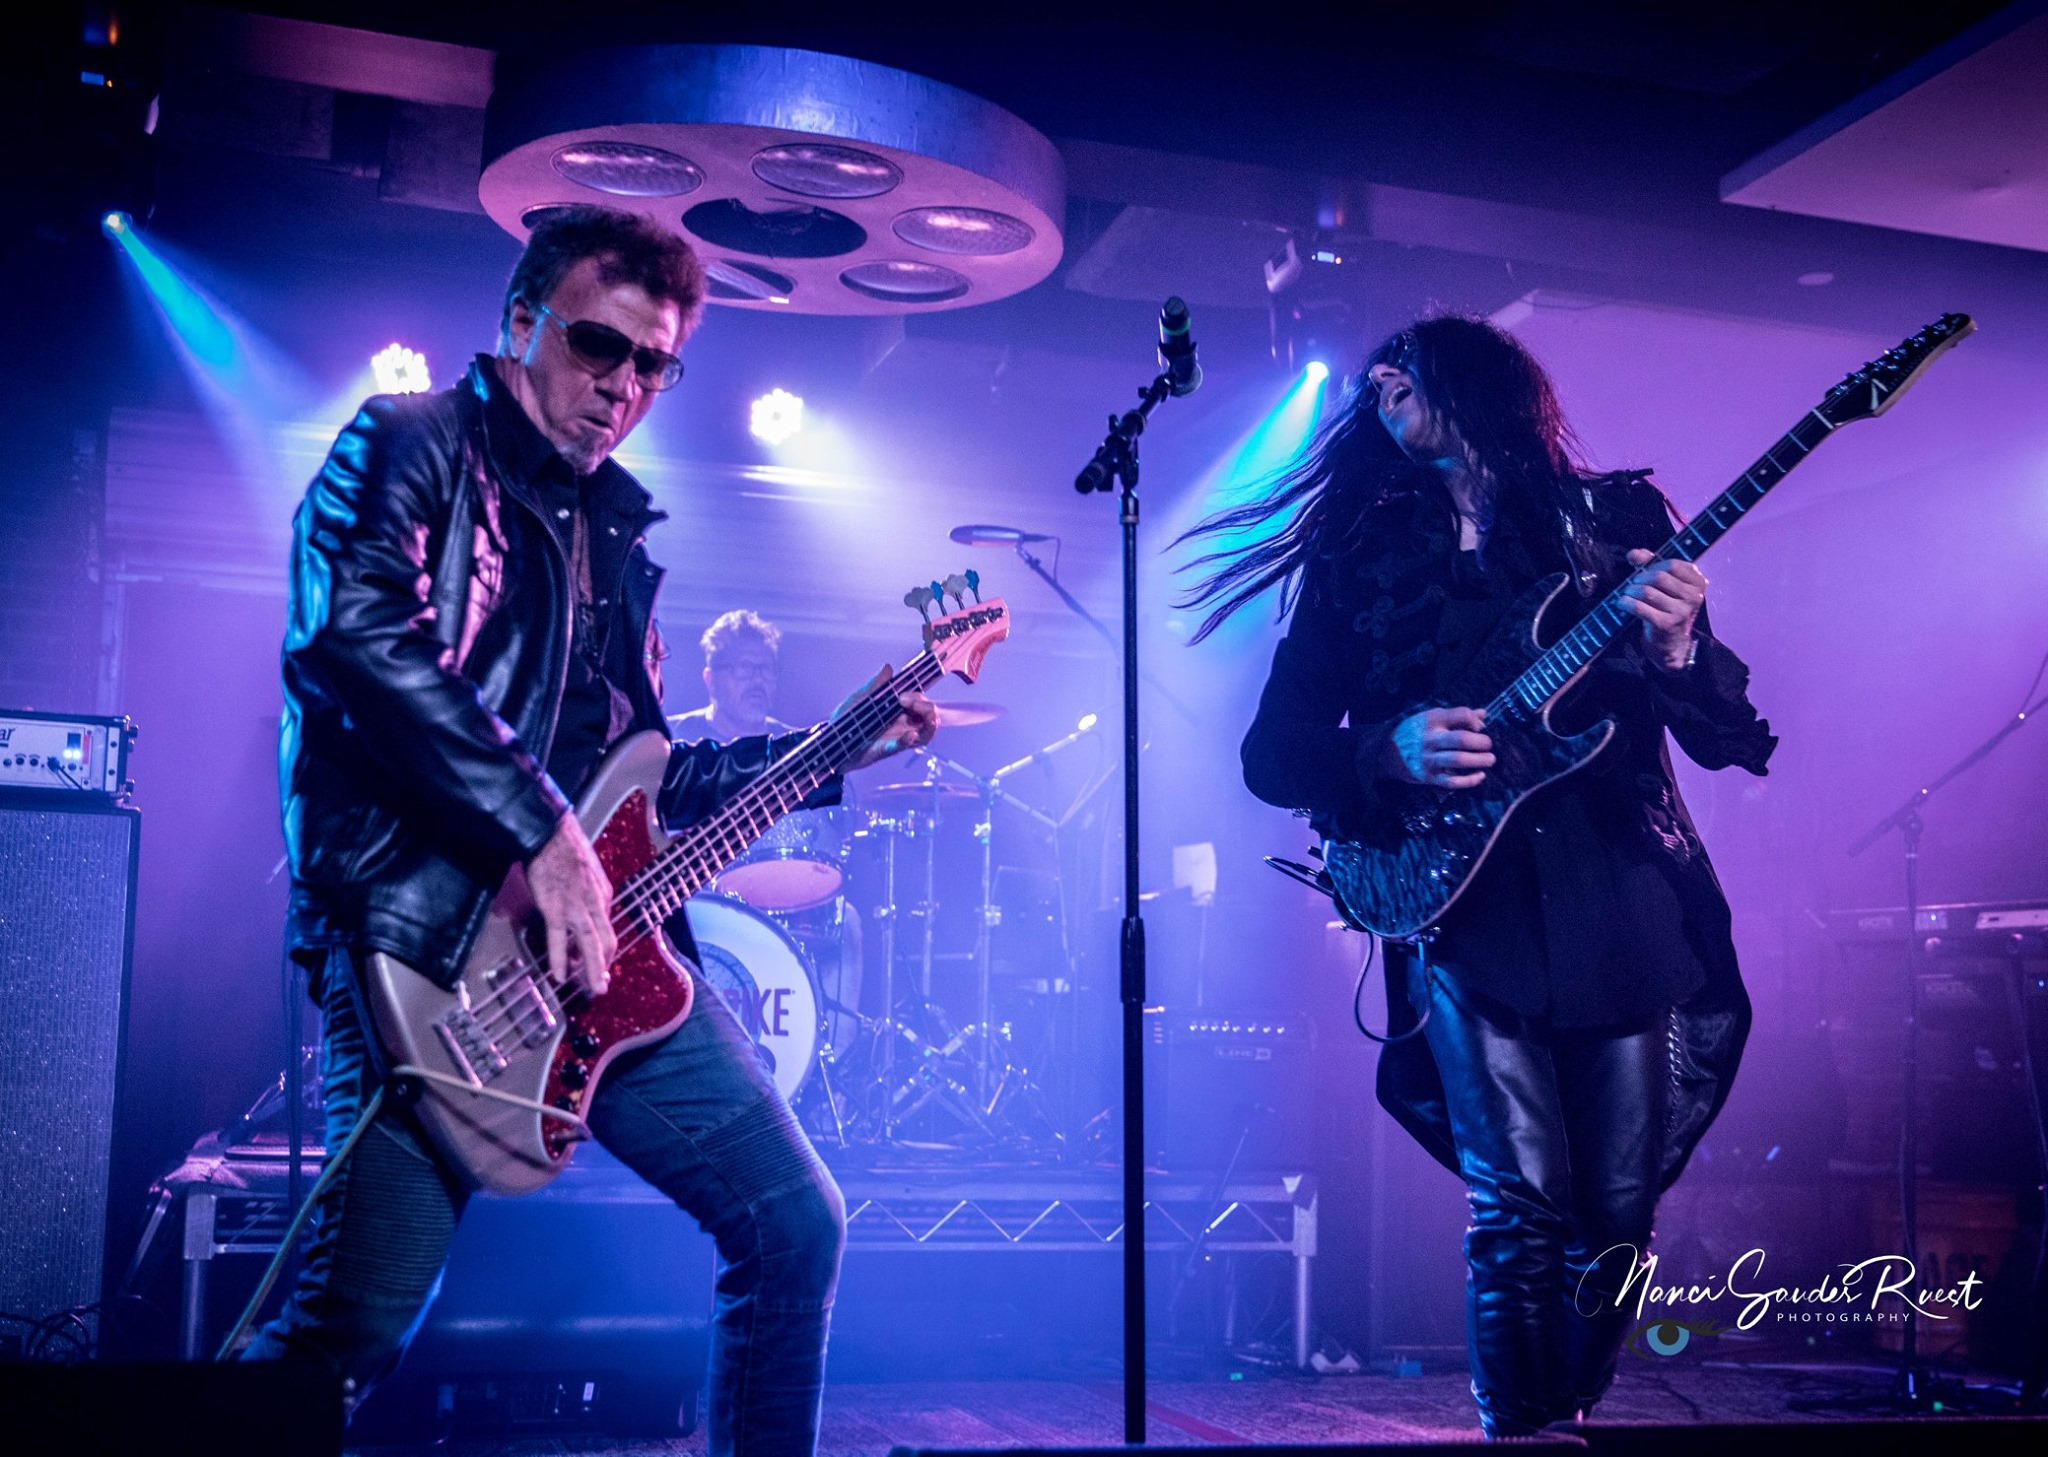 Mike Campese, Soundcheck Live Pic 4, By Nanci Sauder Ruest, 1.